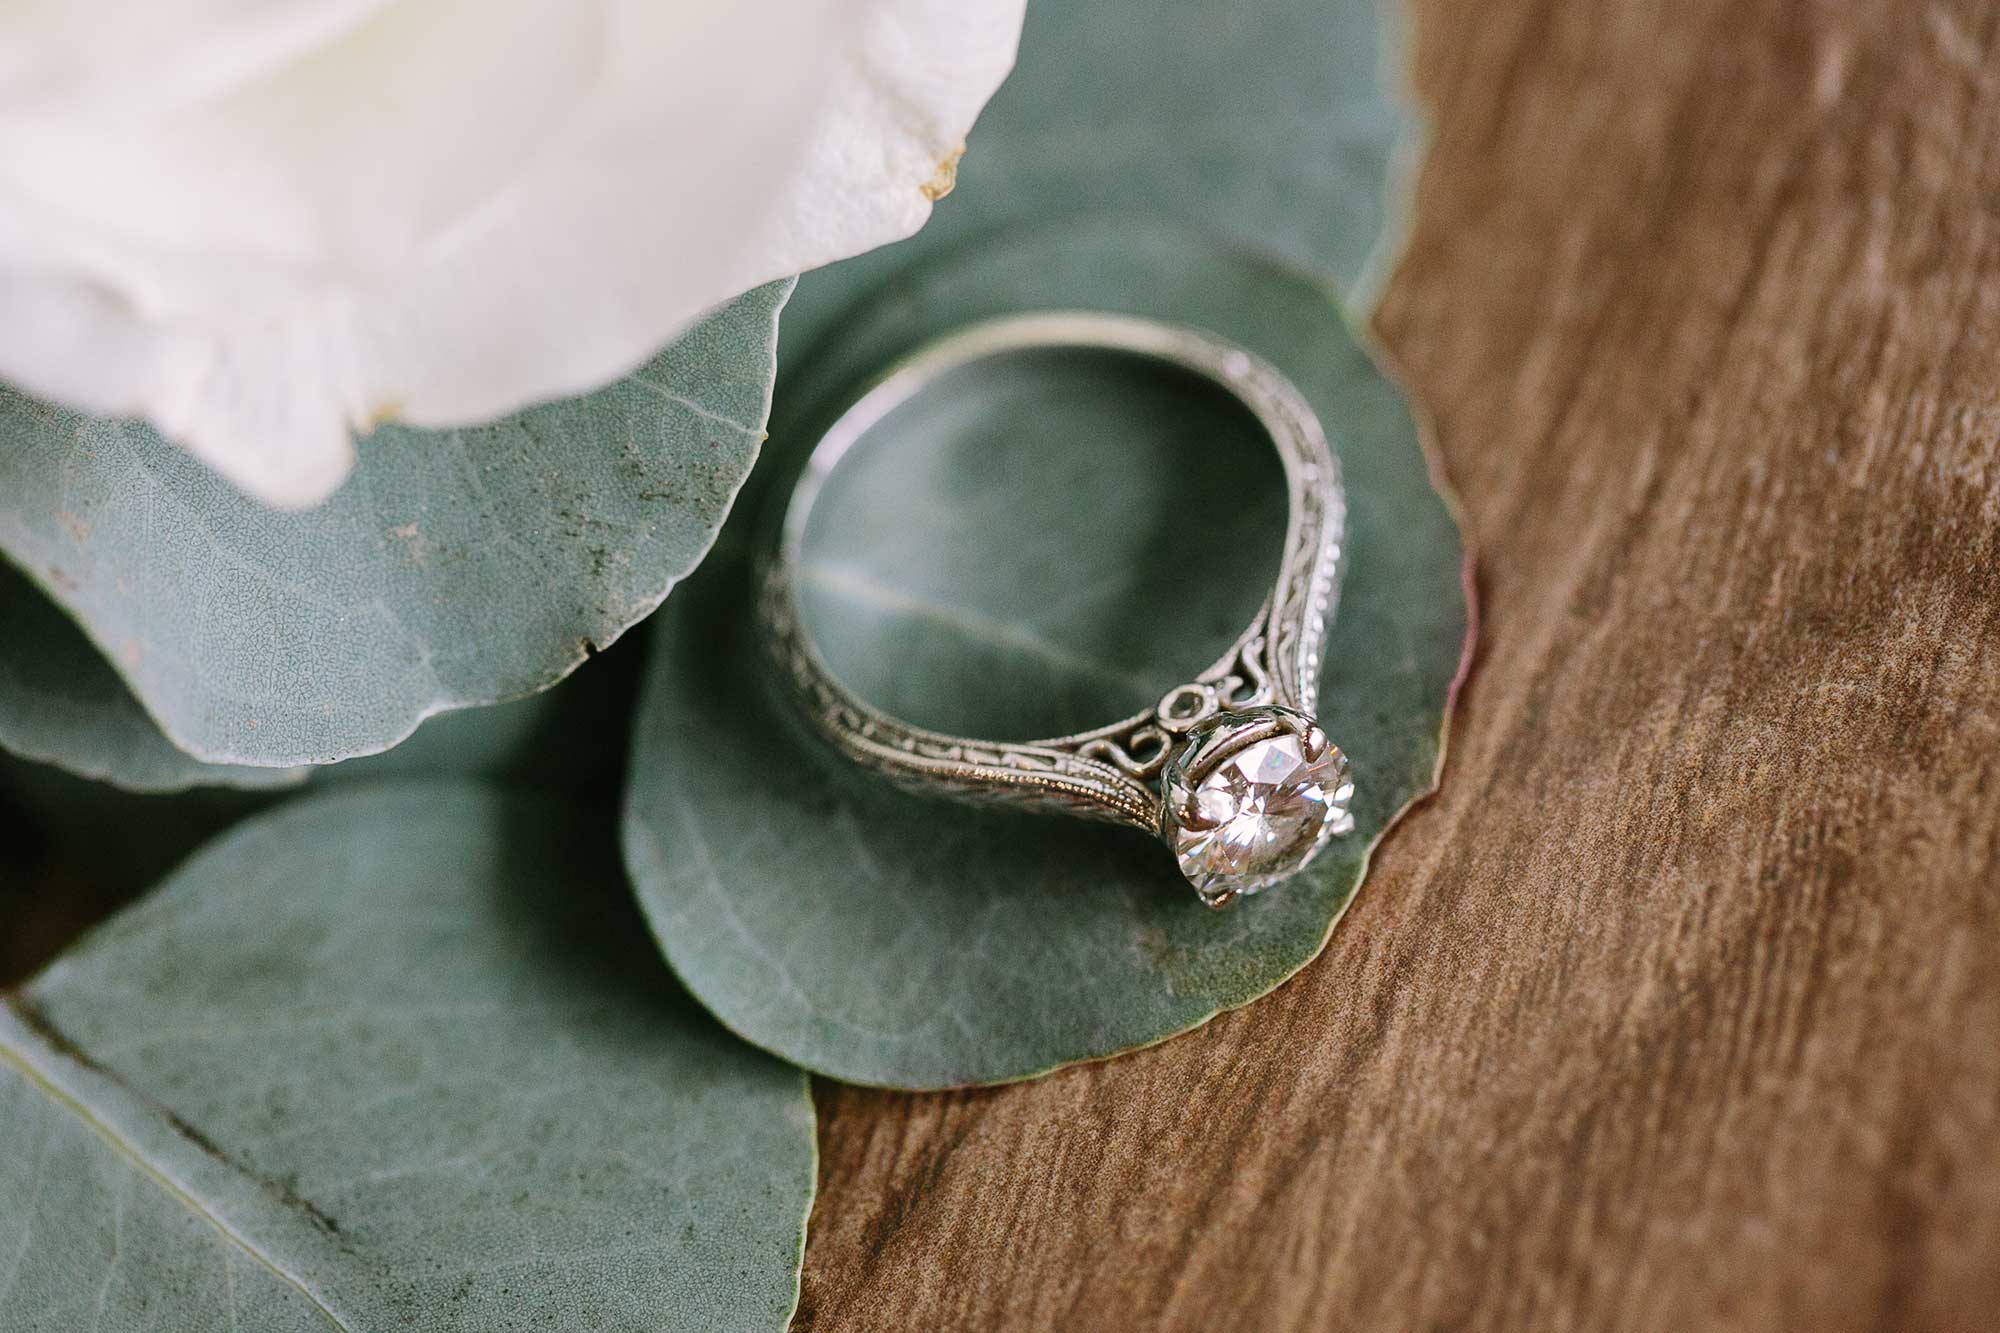 image of wedding ring taken by Tracey Lyn Photography